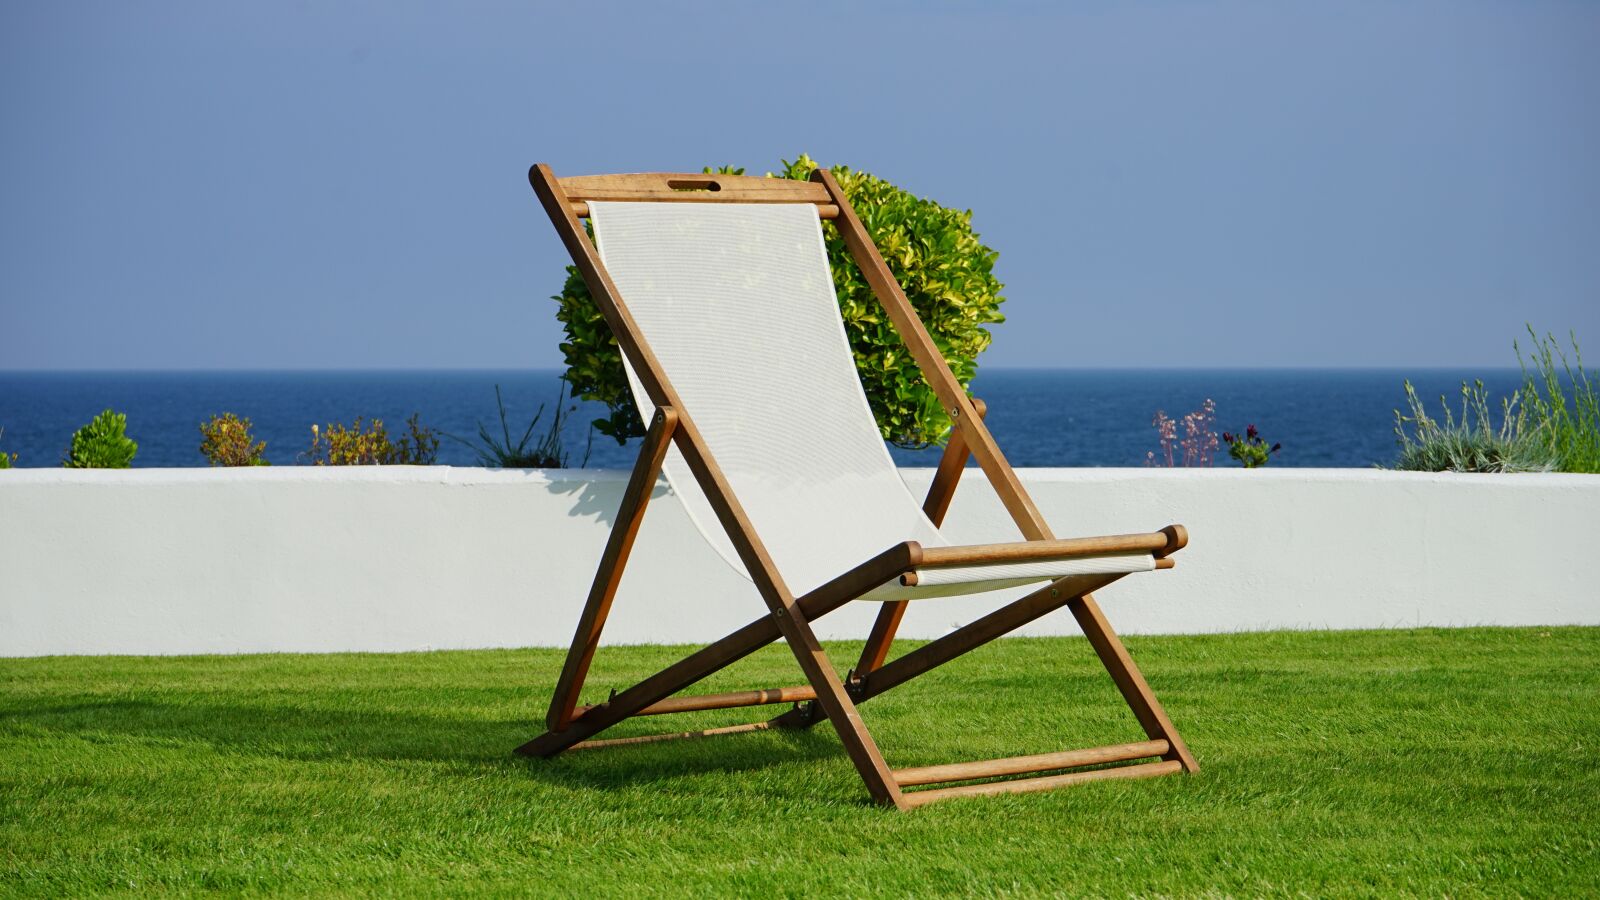 Sony MODEL-NAME + Sony FE 28-70mm F3.5-5.6 OSS sample photo. Deck chair, grass, deck photography